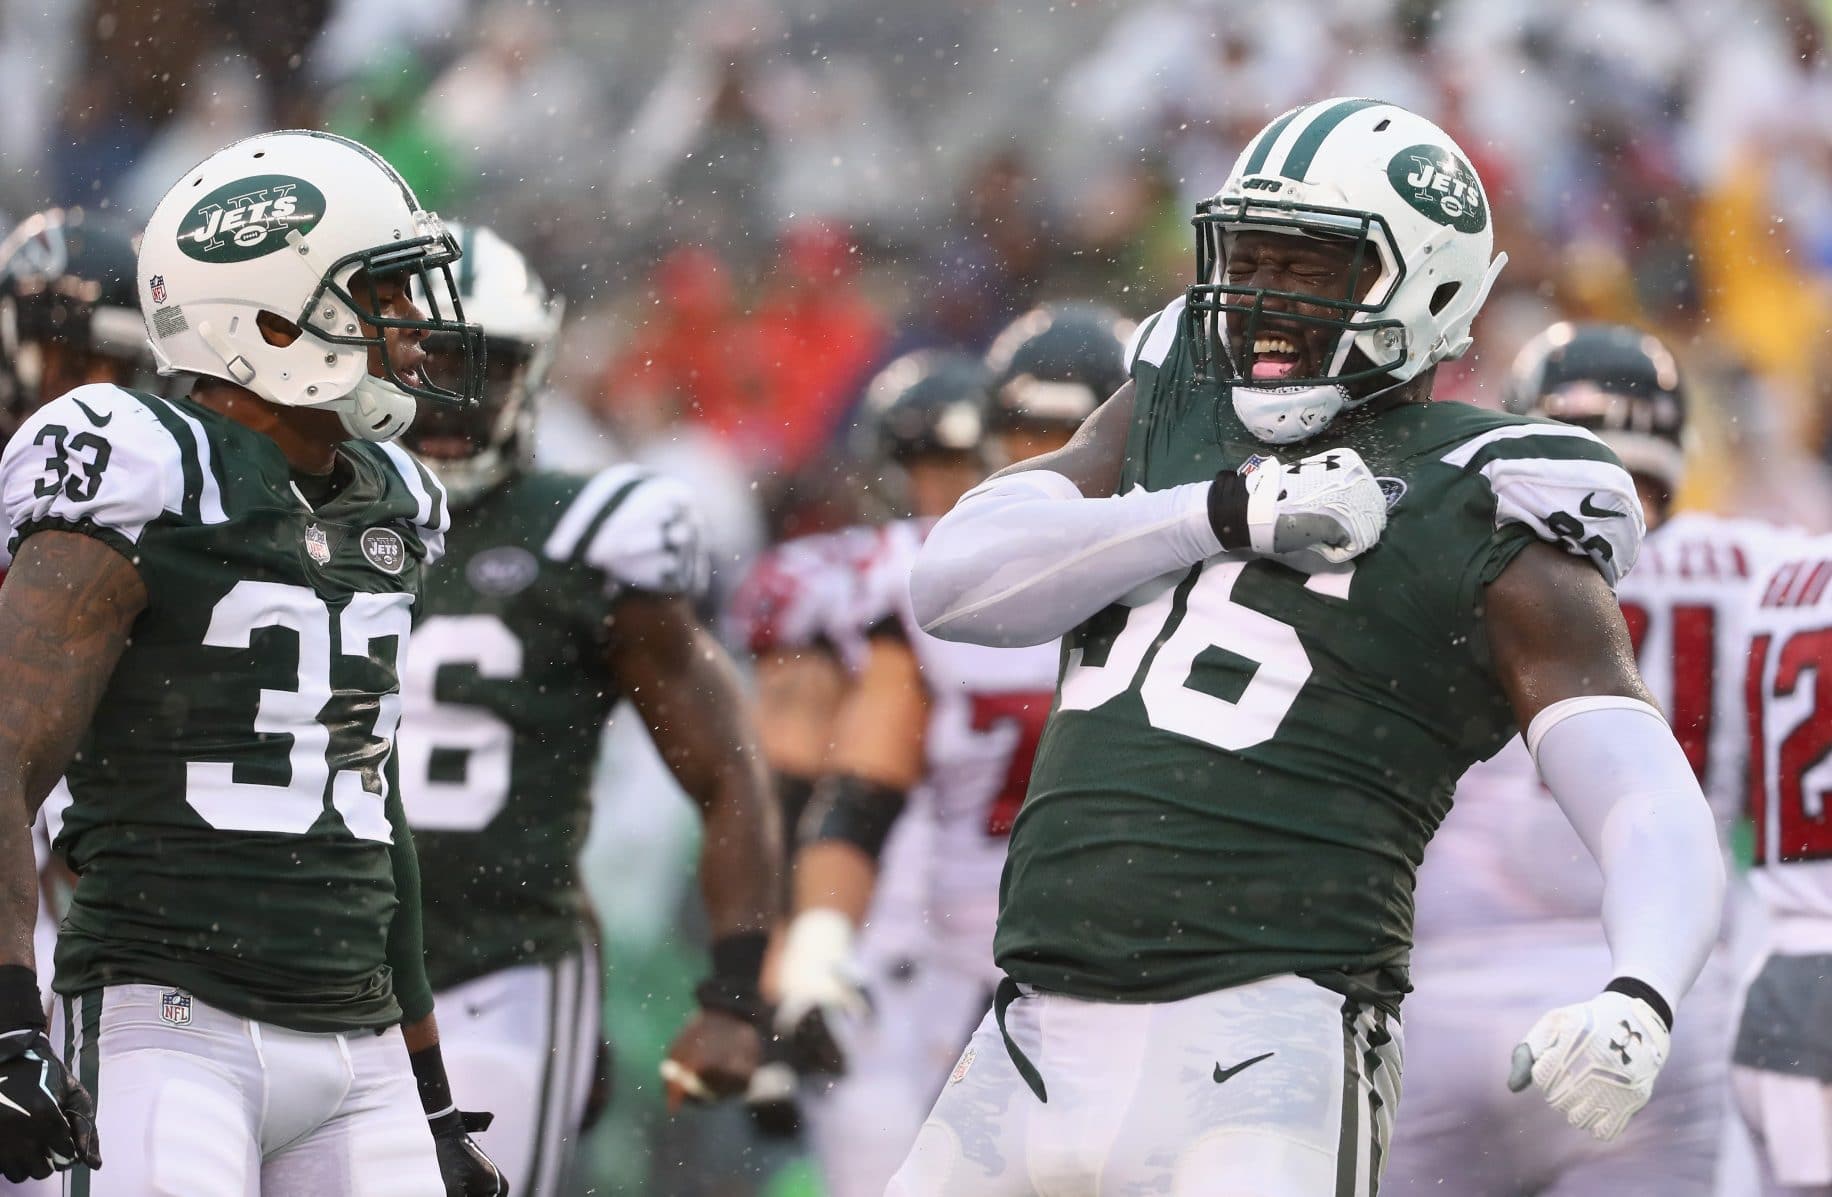 New York Jets Season Typical of Young Team Learning How to Win 2